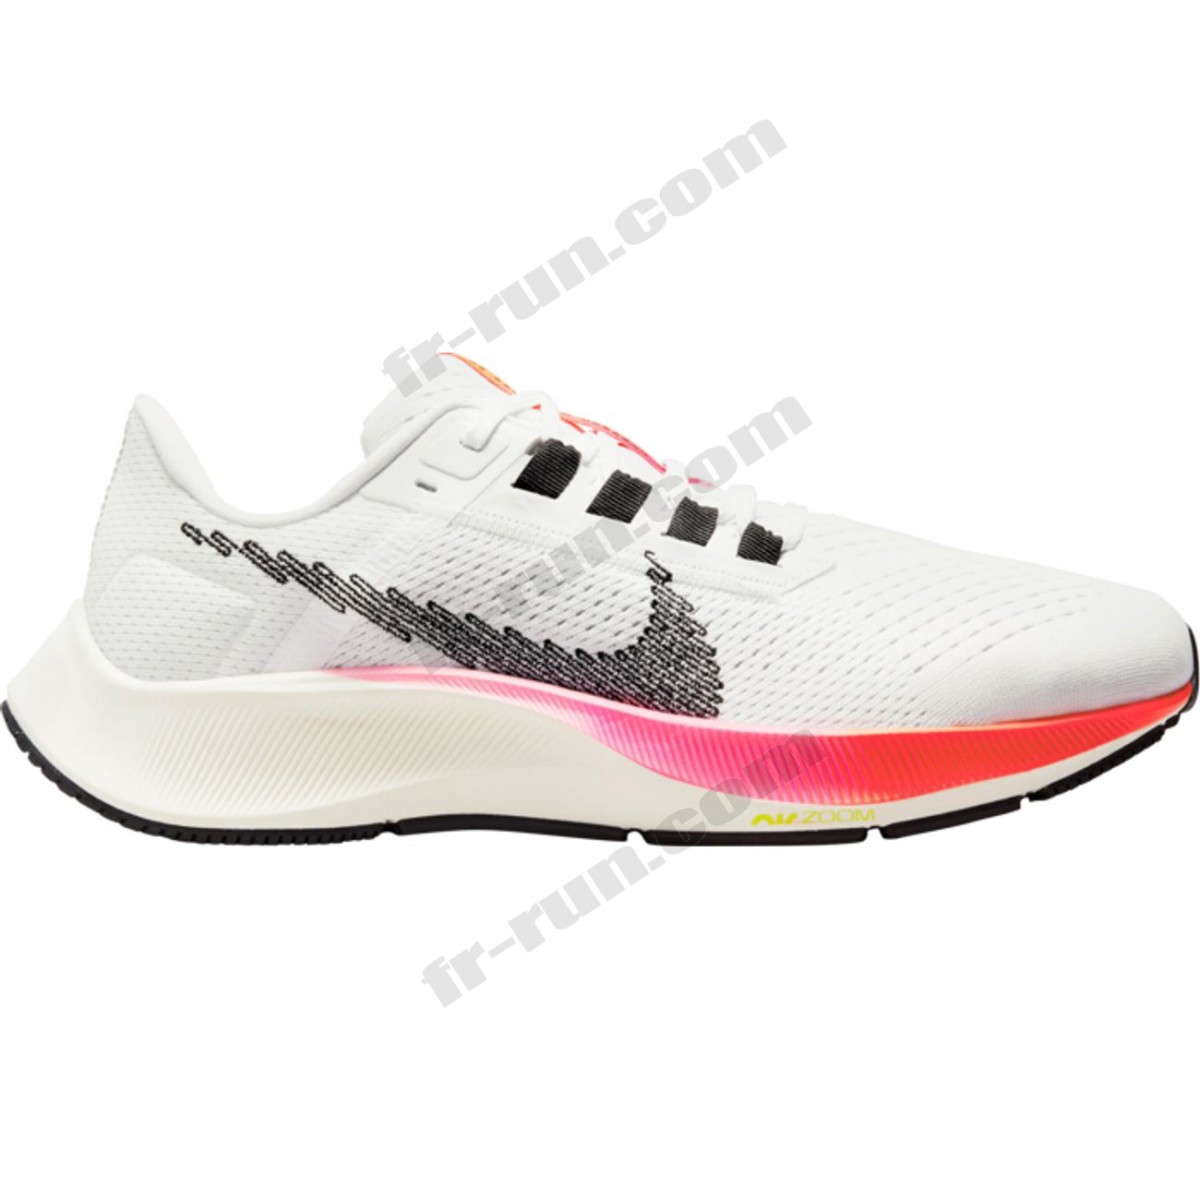 Nike/CHAUSSURES BASSES running femme NIKE W NIKE AIR ZOOM PEGASUS 38 T √ Nouveau style √ Soldes - Nike/CHAUSSURES BASSES running femme NIKE W NIKE AIR ZOOM PEGASUS 38 T √ Nouveau style √ Soldes